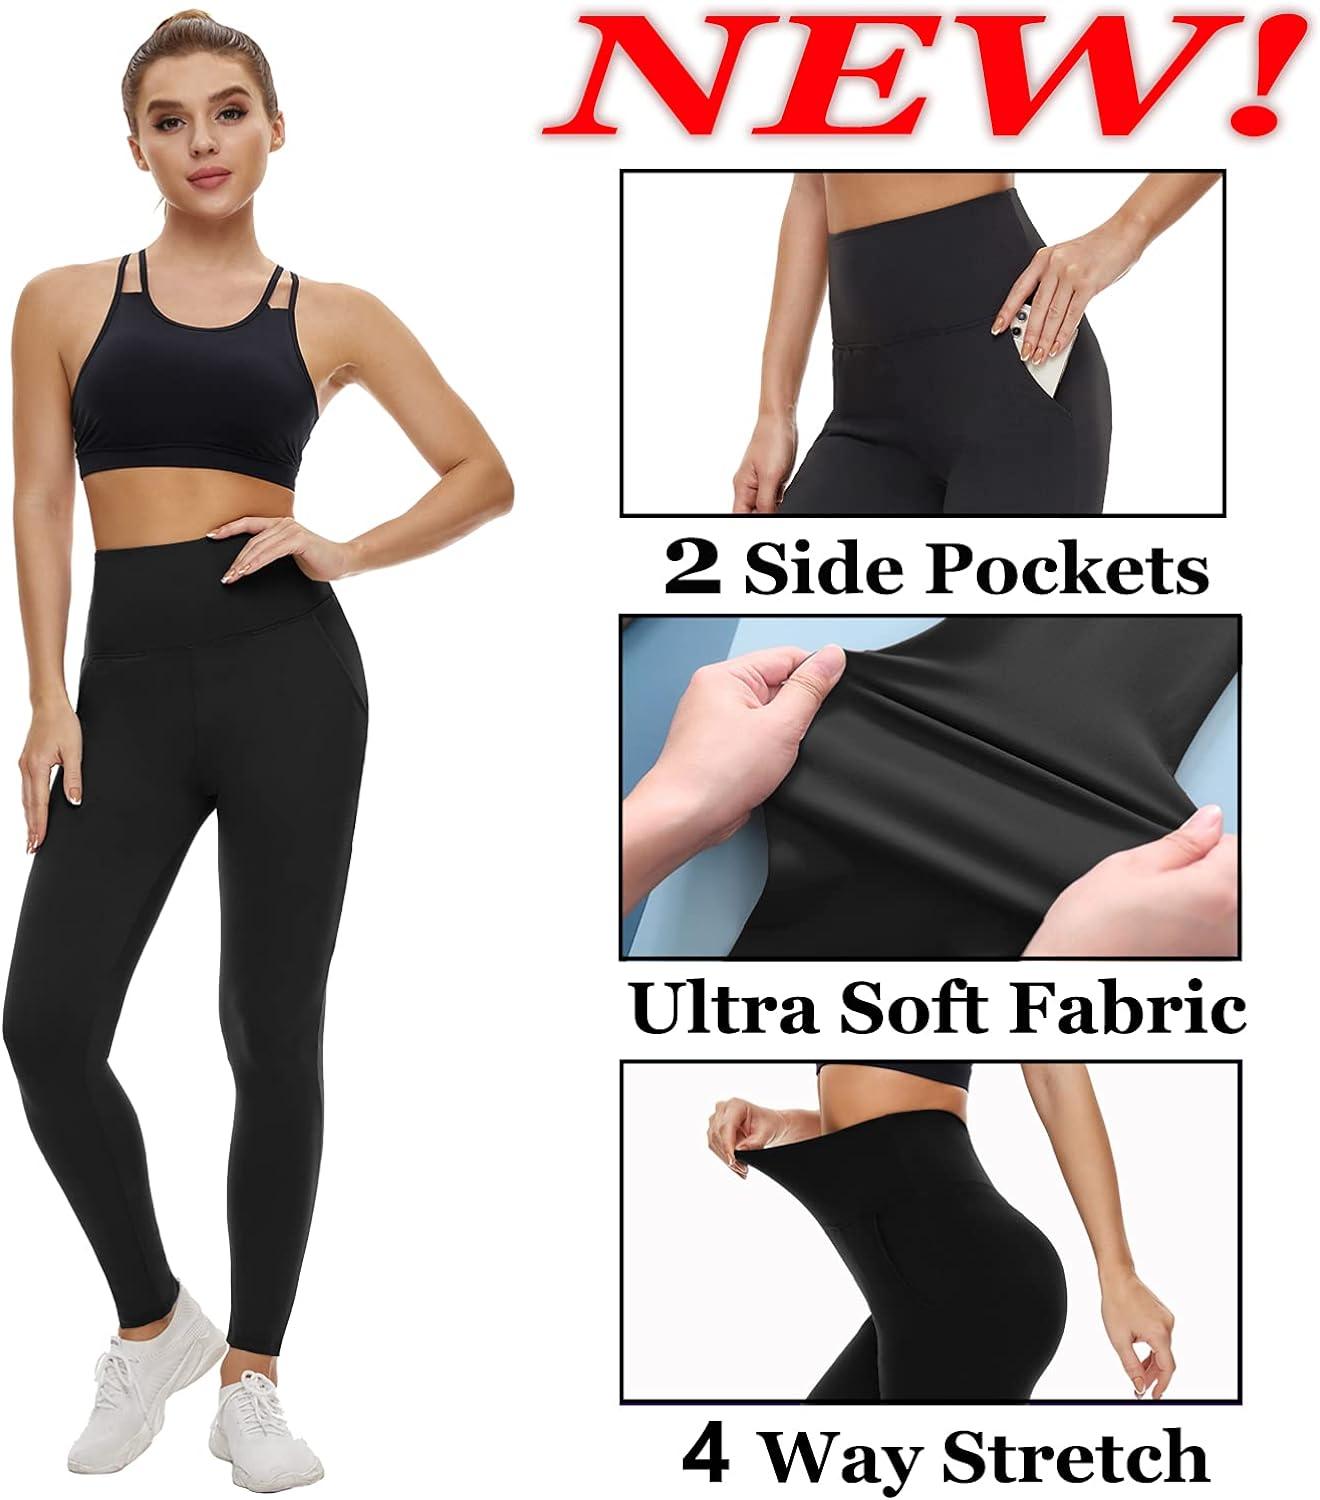 Buy NEW YOUNG 3 Pack Leggings with Pockets for Women,High Waisted Tummy  Control Workout Yoga Pants at